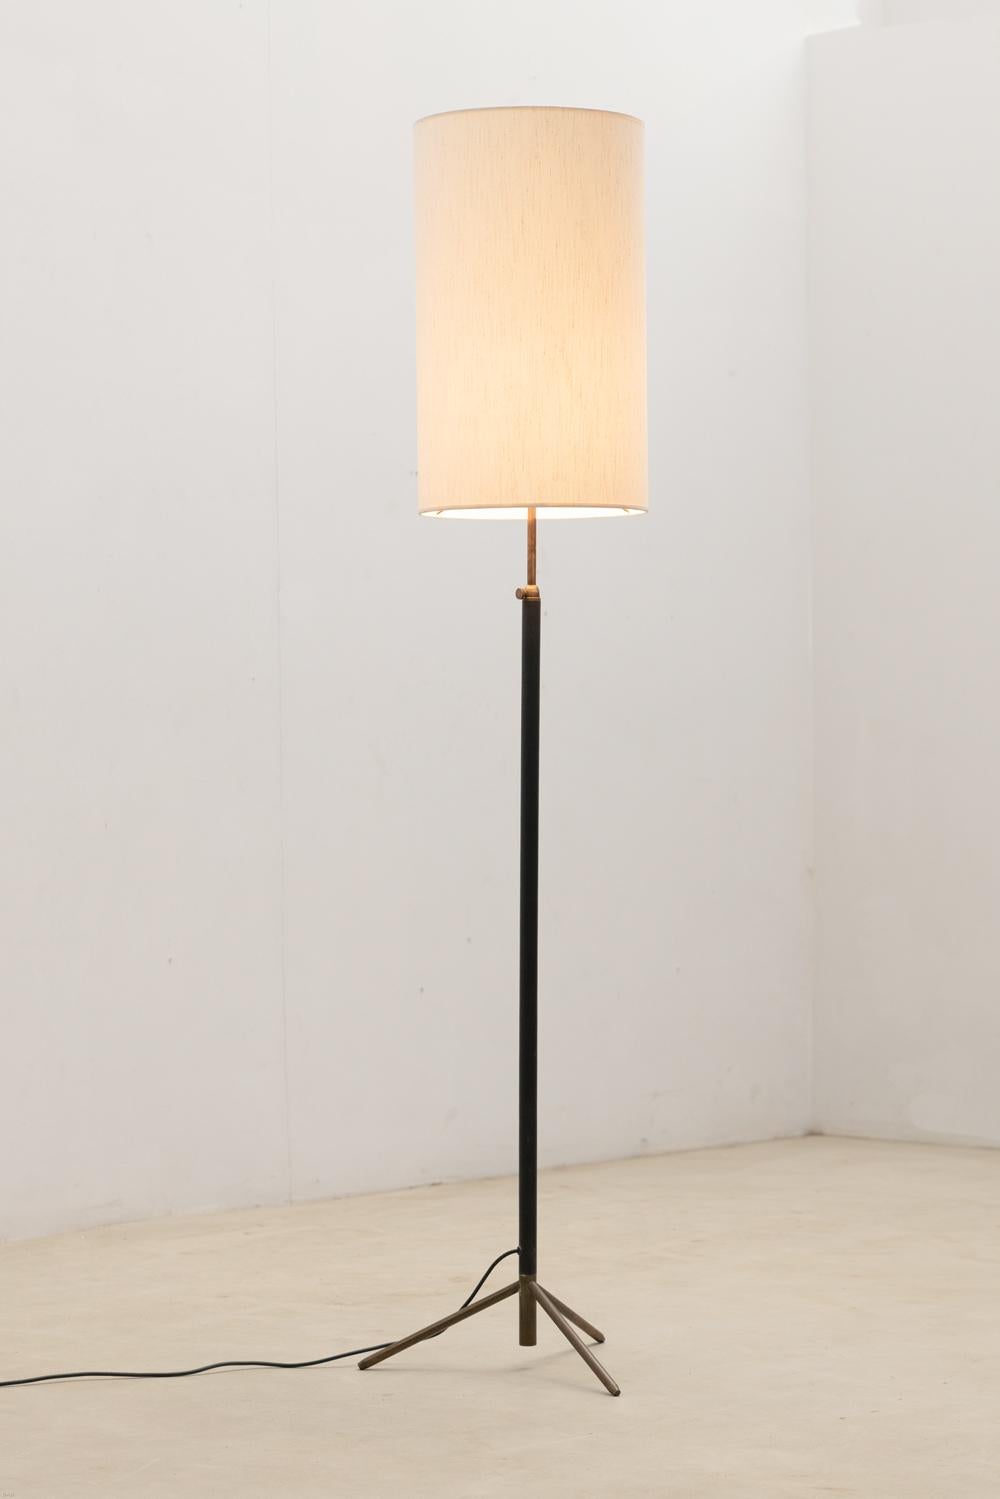 Elegant floor lamp featuring a sleek black leather-covered stem complemented by a brass tripod base.

New shade.

Do not hesitate to contact us for any additional information. We would be more than delighted to assist you in any way we can.

